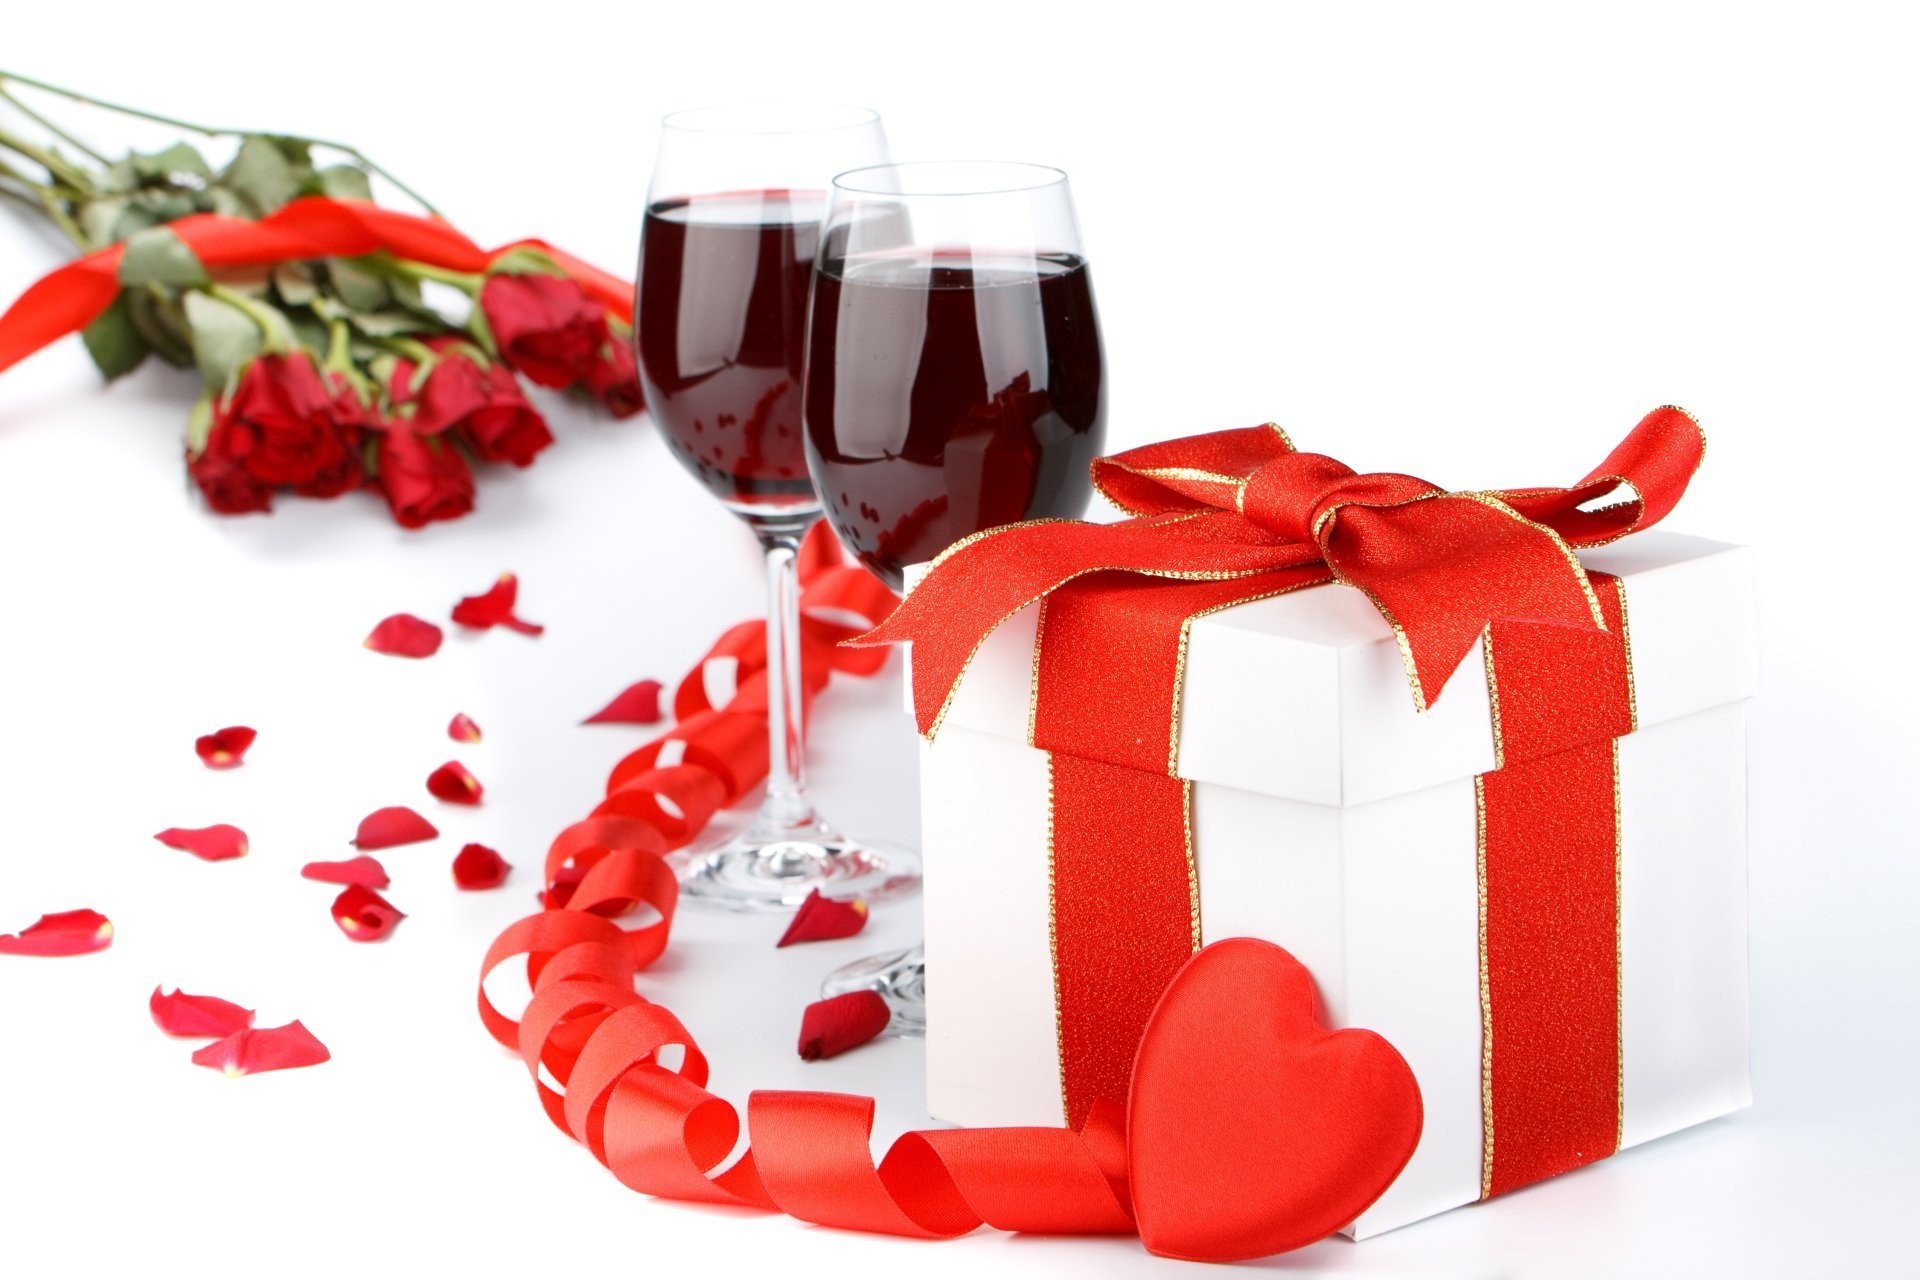 holidays wine valentine's day glasses gifts heart belt food photo